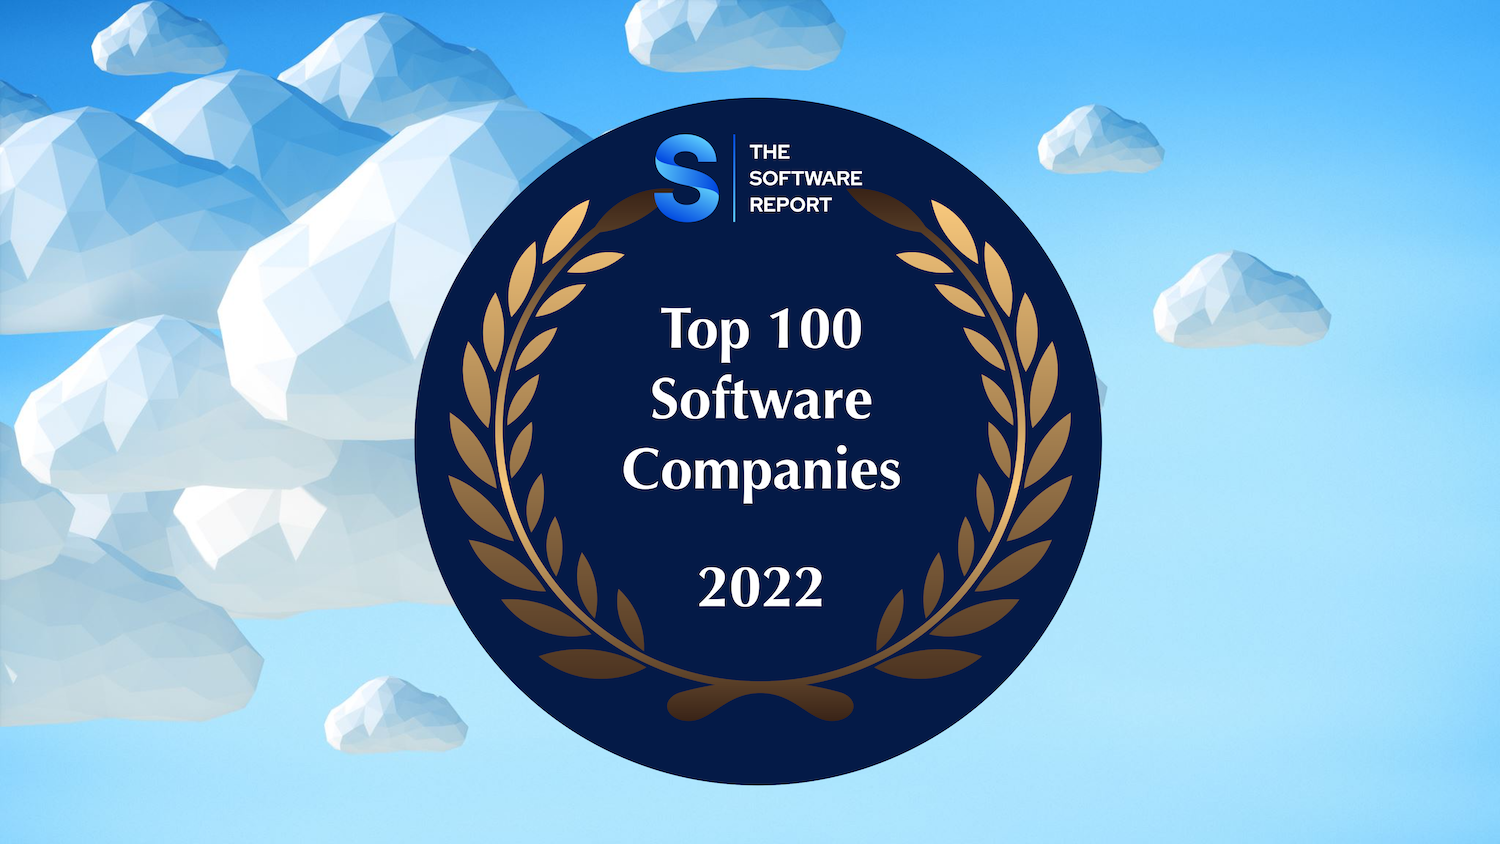 The Top 100 Software Companies of 2022 The Software Report